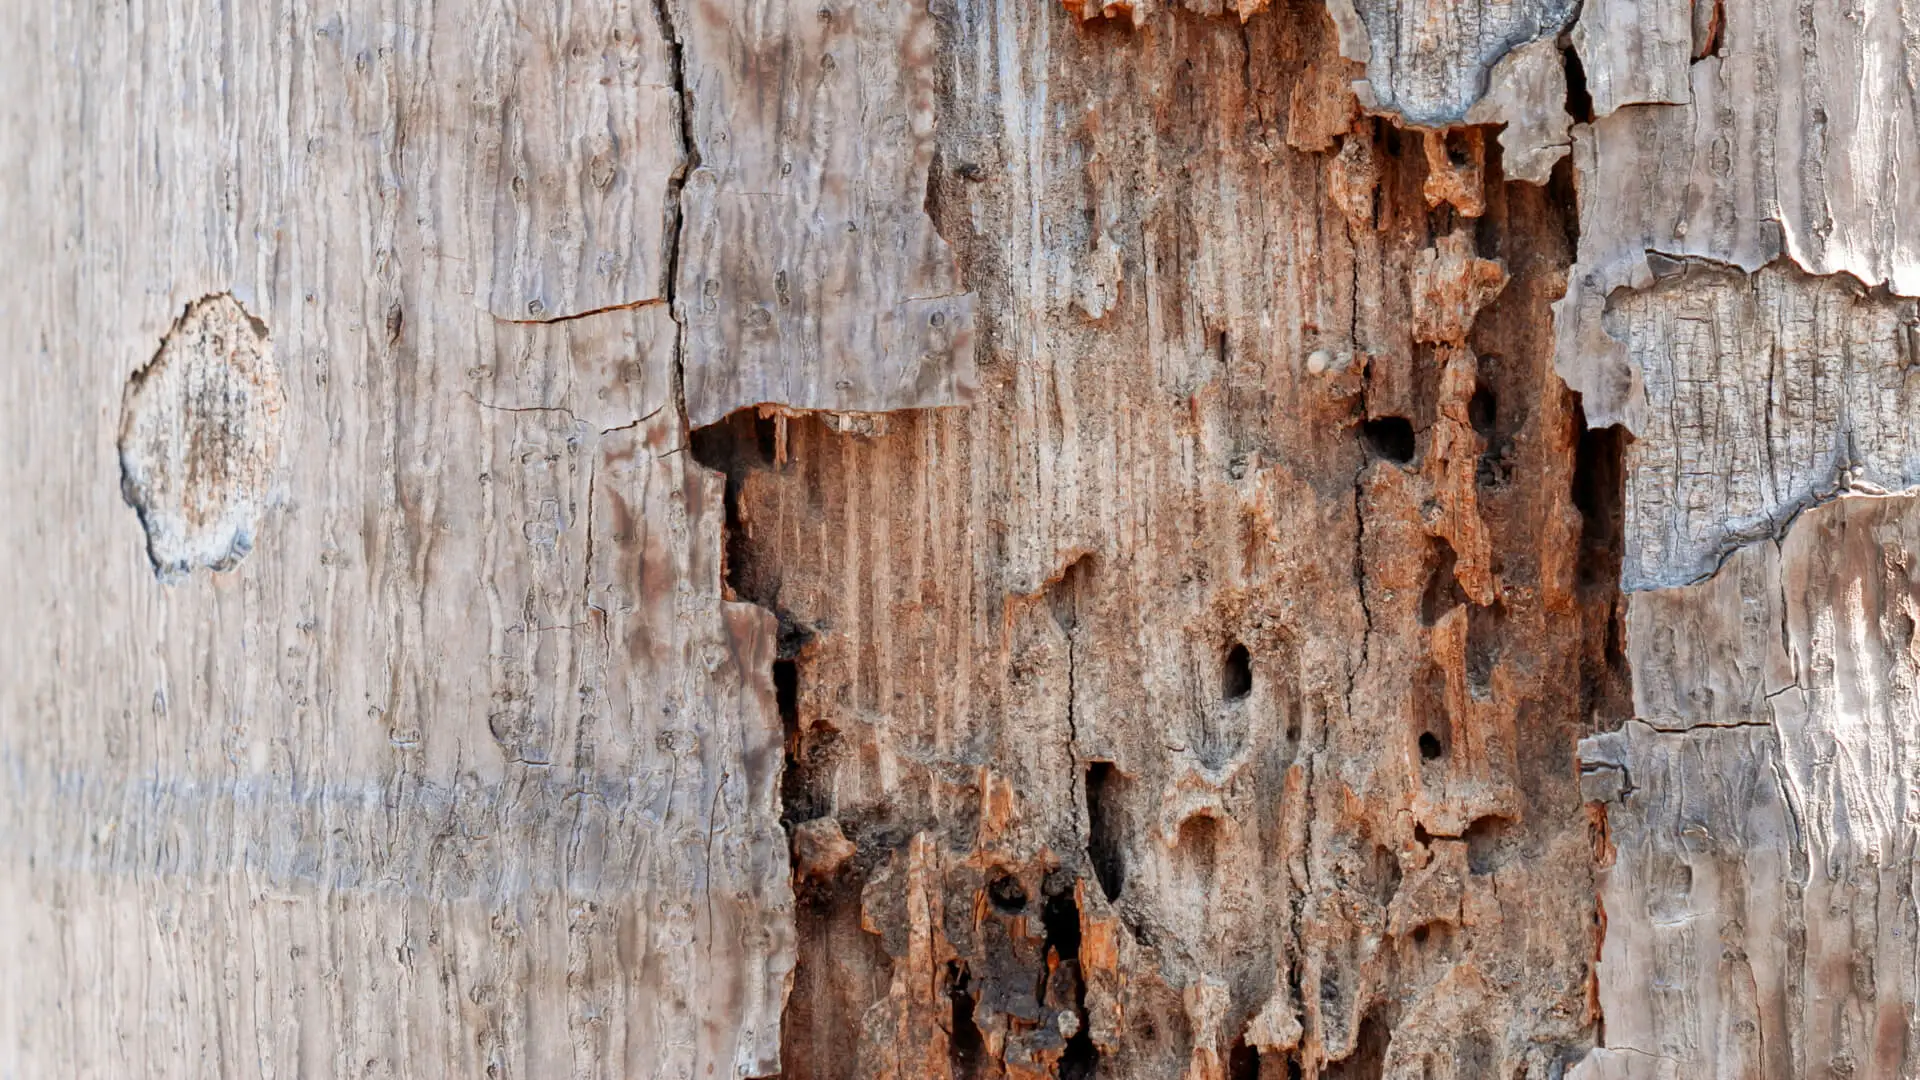 Protect Your Trees this fall against Insect Damage: Pest Control Murphy TX Pros Share Their Tips